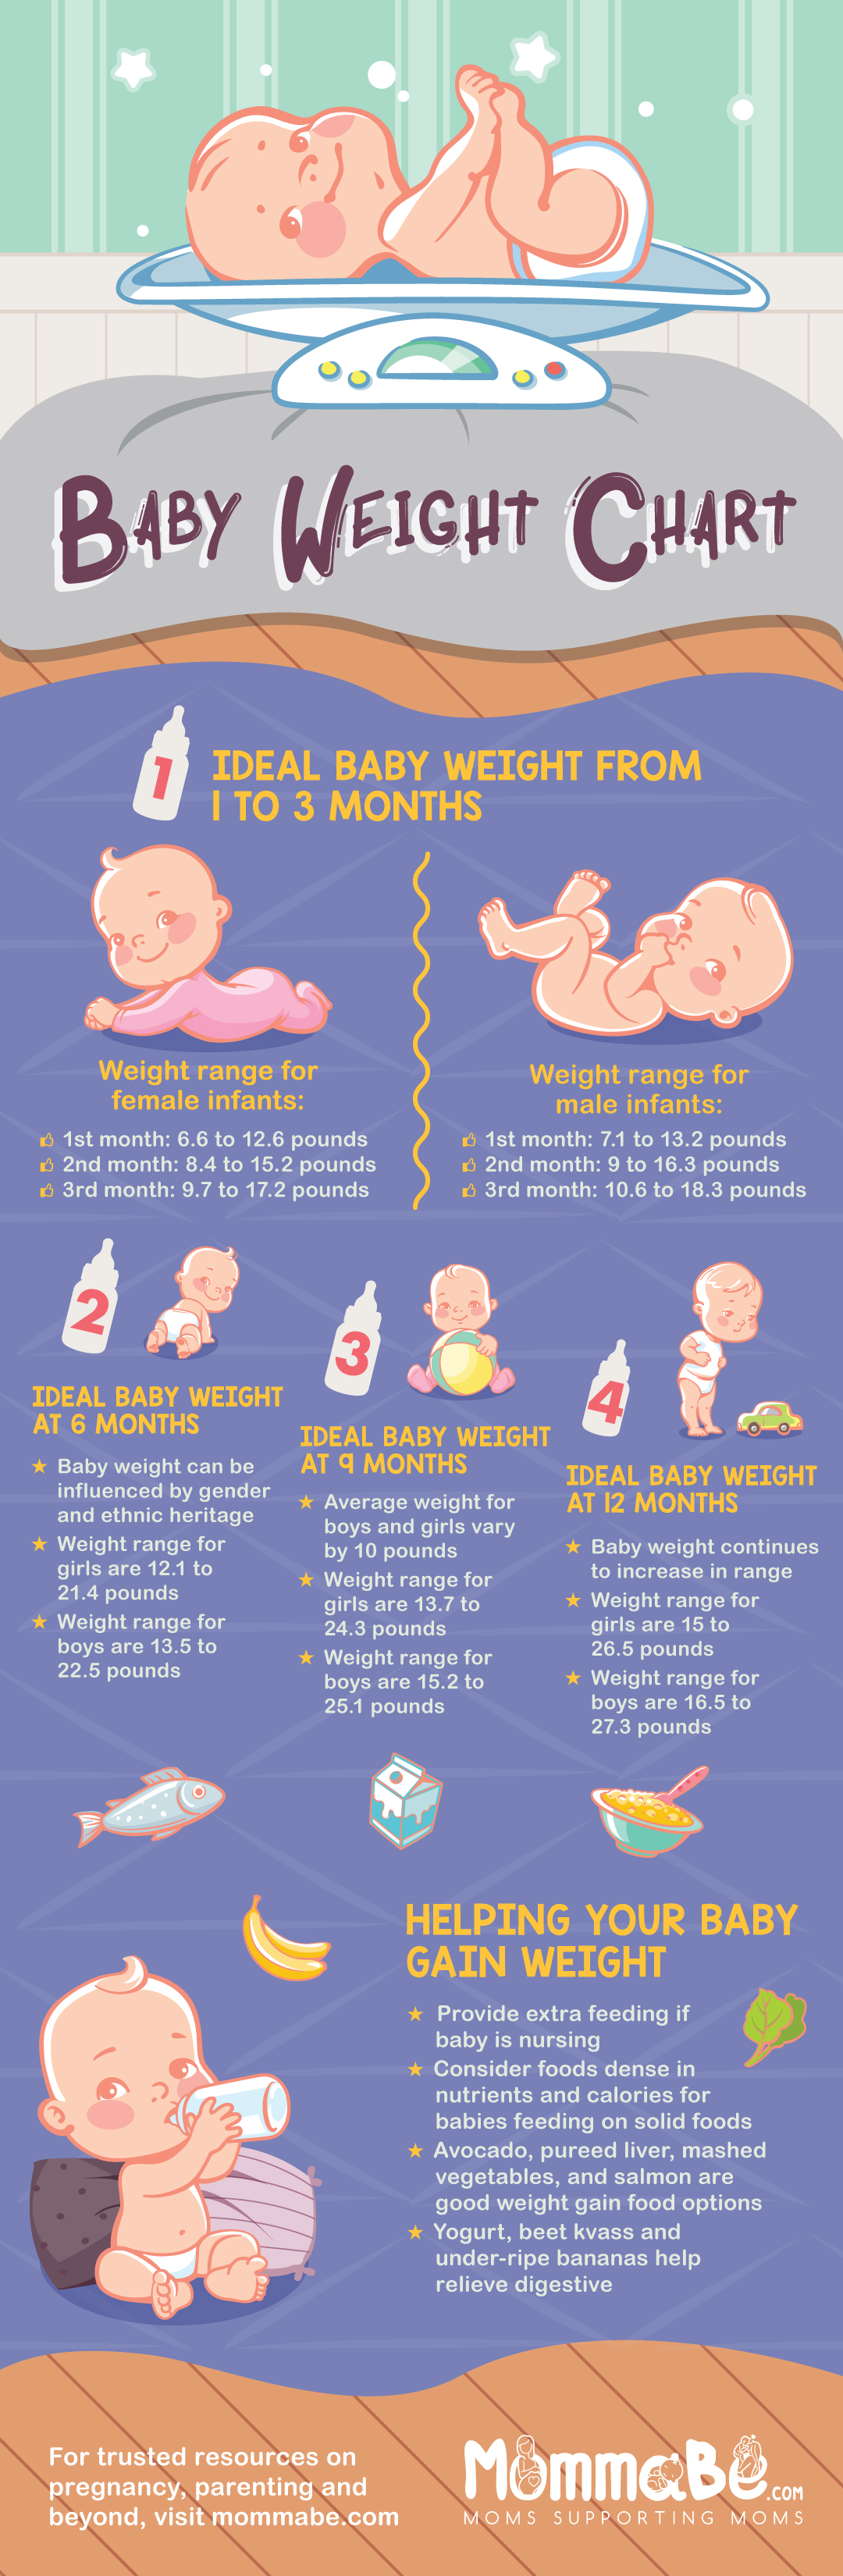 INFOGRAPHIC | Weight Chart | Baby Weight Chart | How Much Should My Baby Weigh? [INFOGRAPHIC]